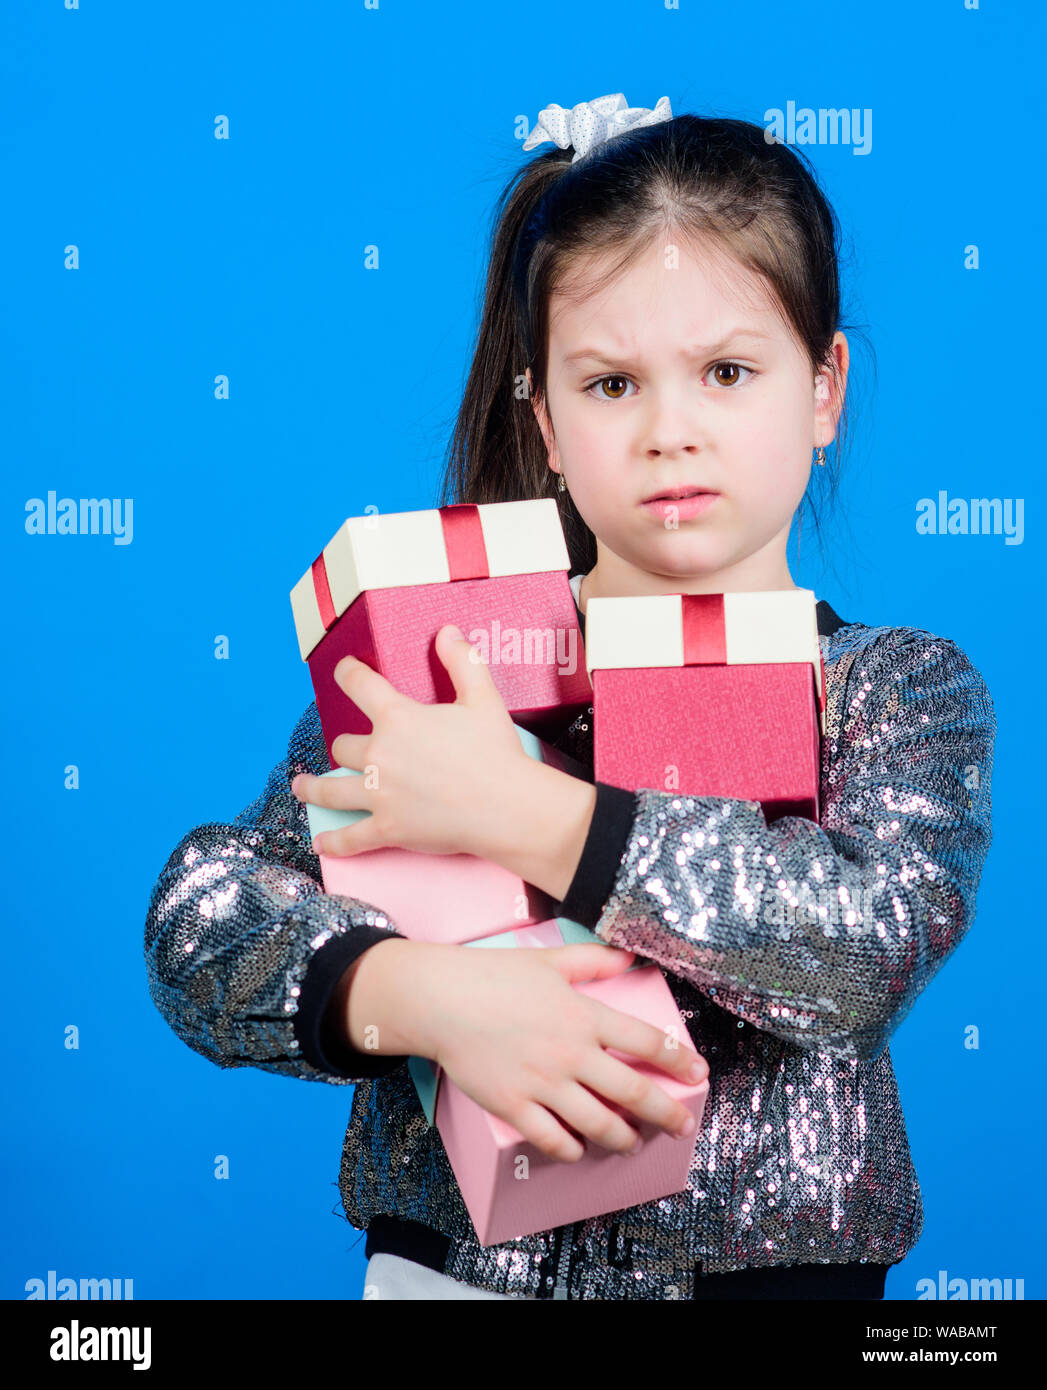 Girl with gift boxes blue background. Black friday. Shopping day. Child carry lot gift boxes. Surprise gift box. Birthday wish list. World of happiness. Only for me. Special happens every day. Stock Photo